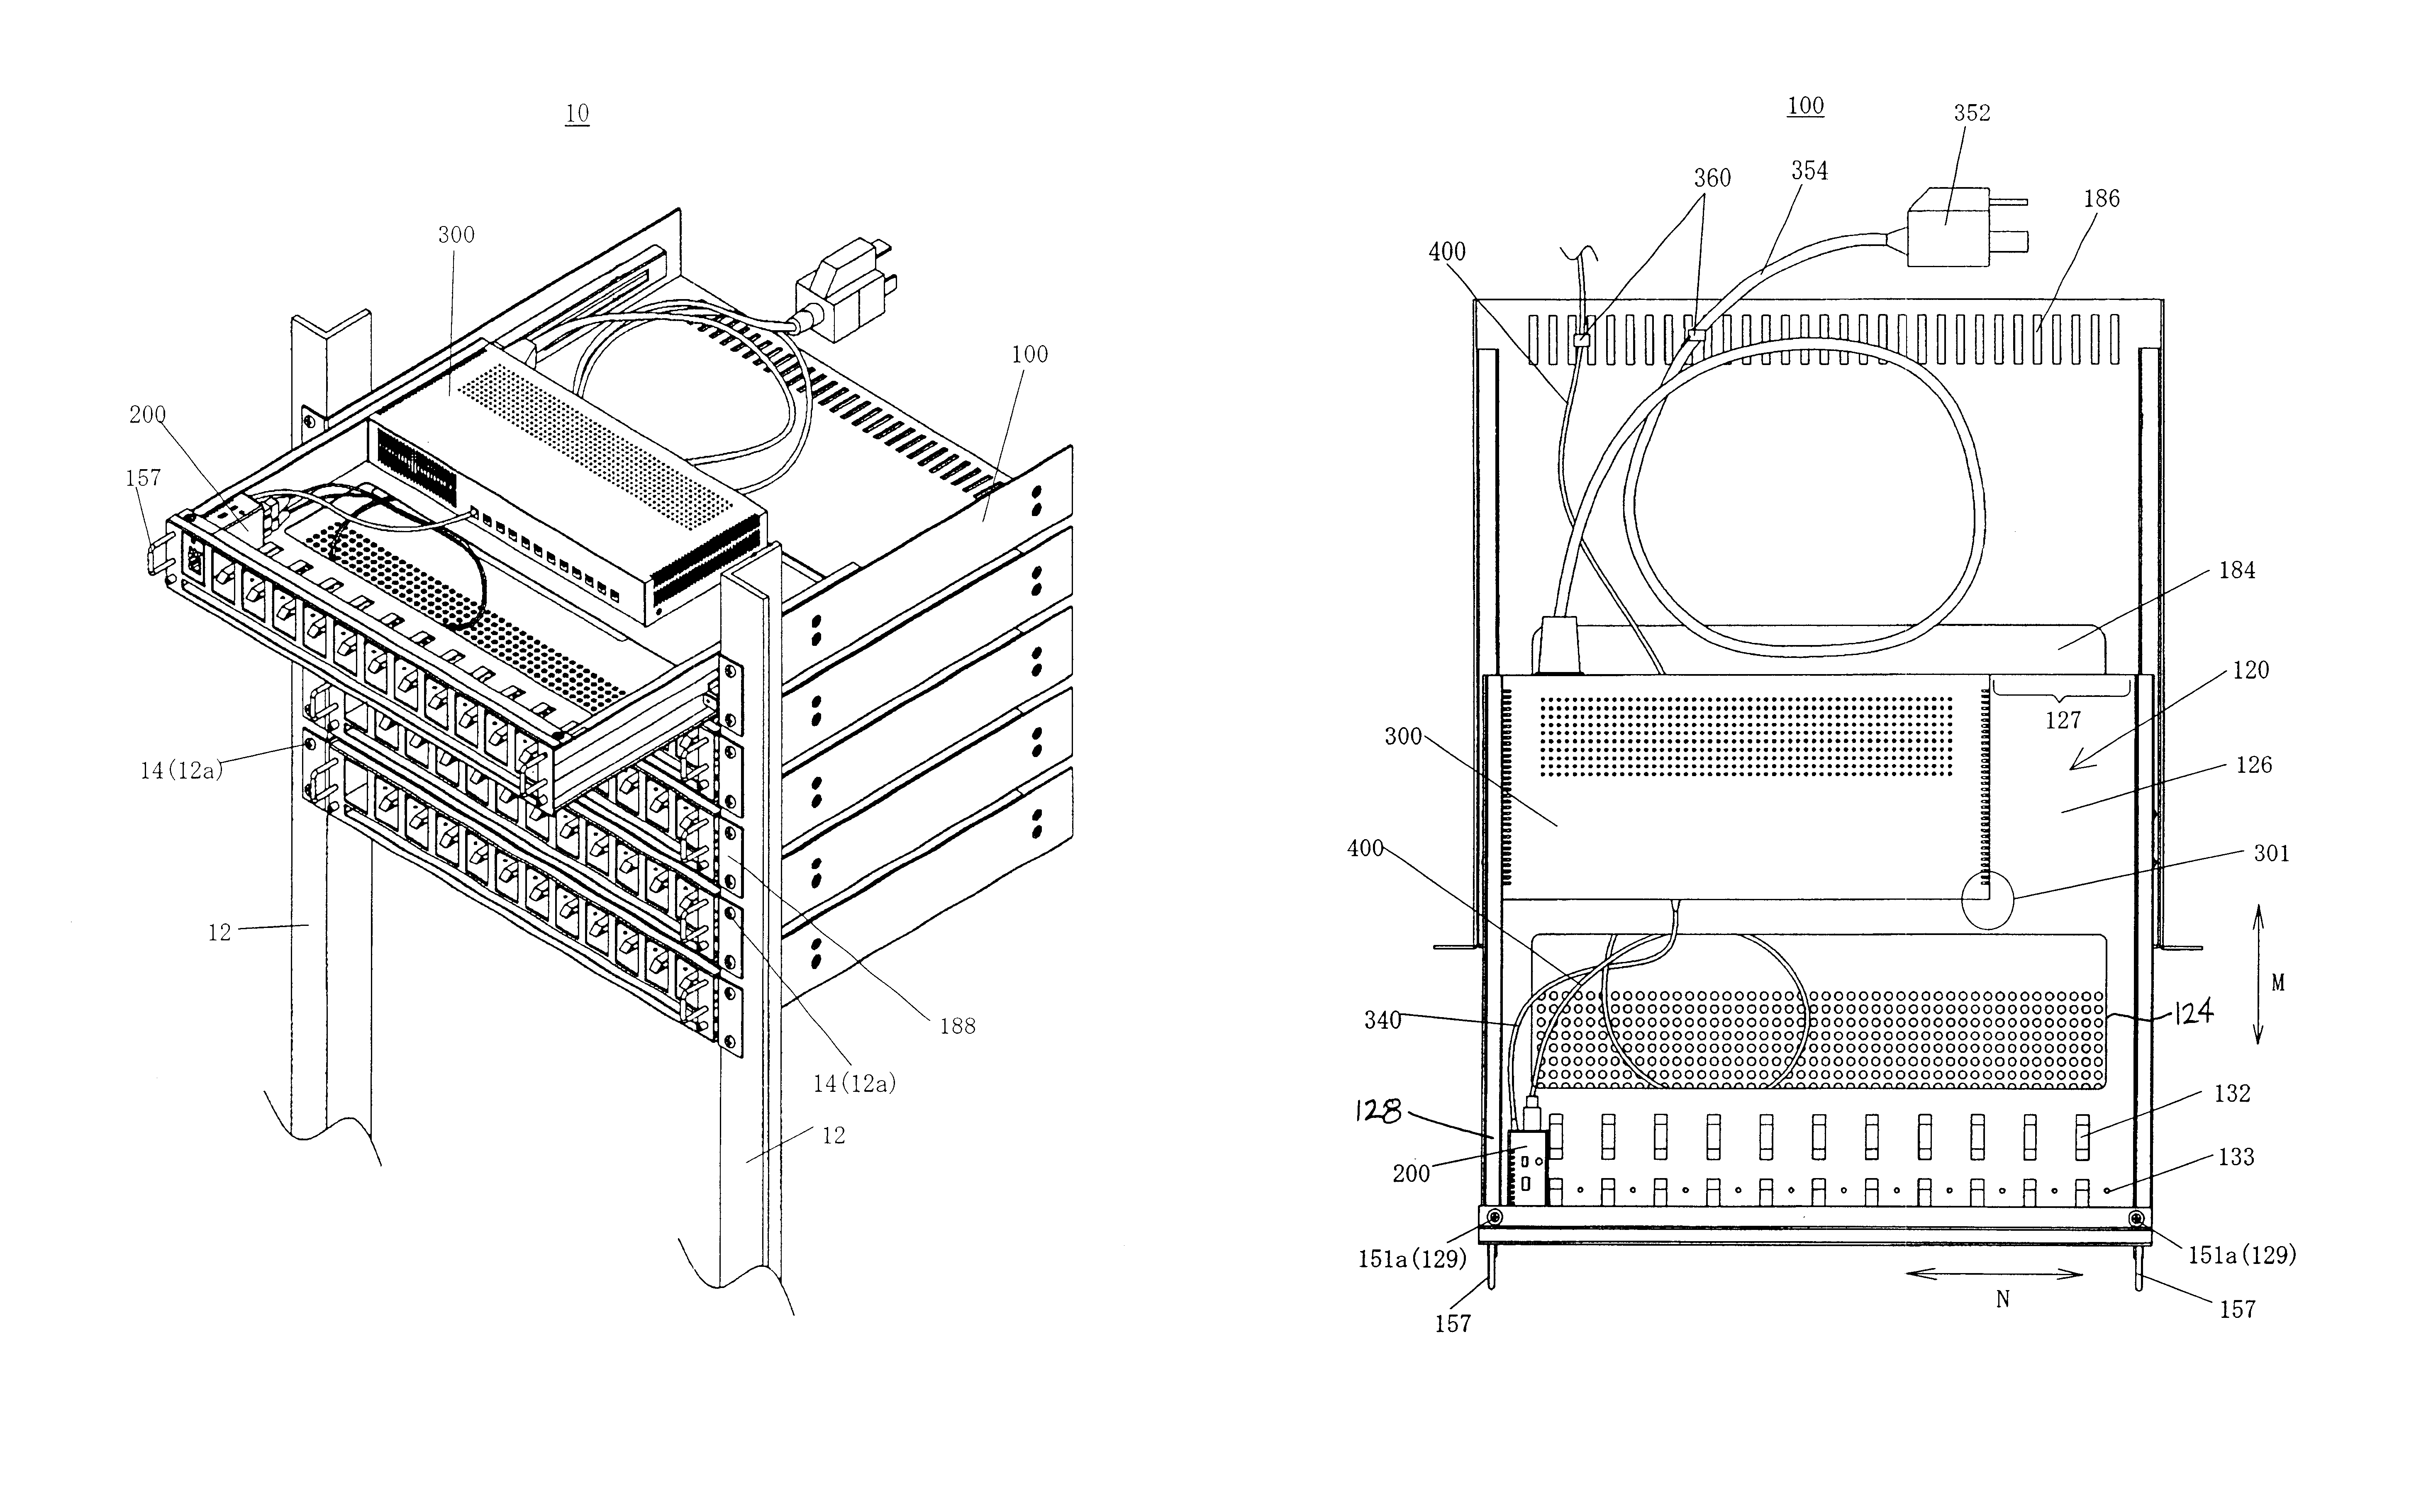 Accommodation apparatus for communication devices